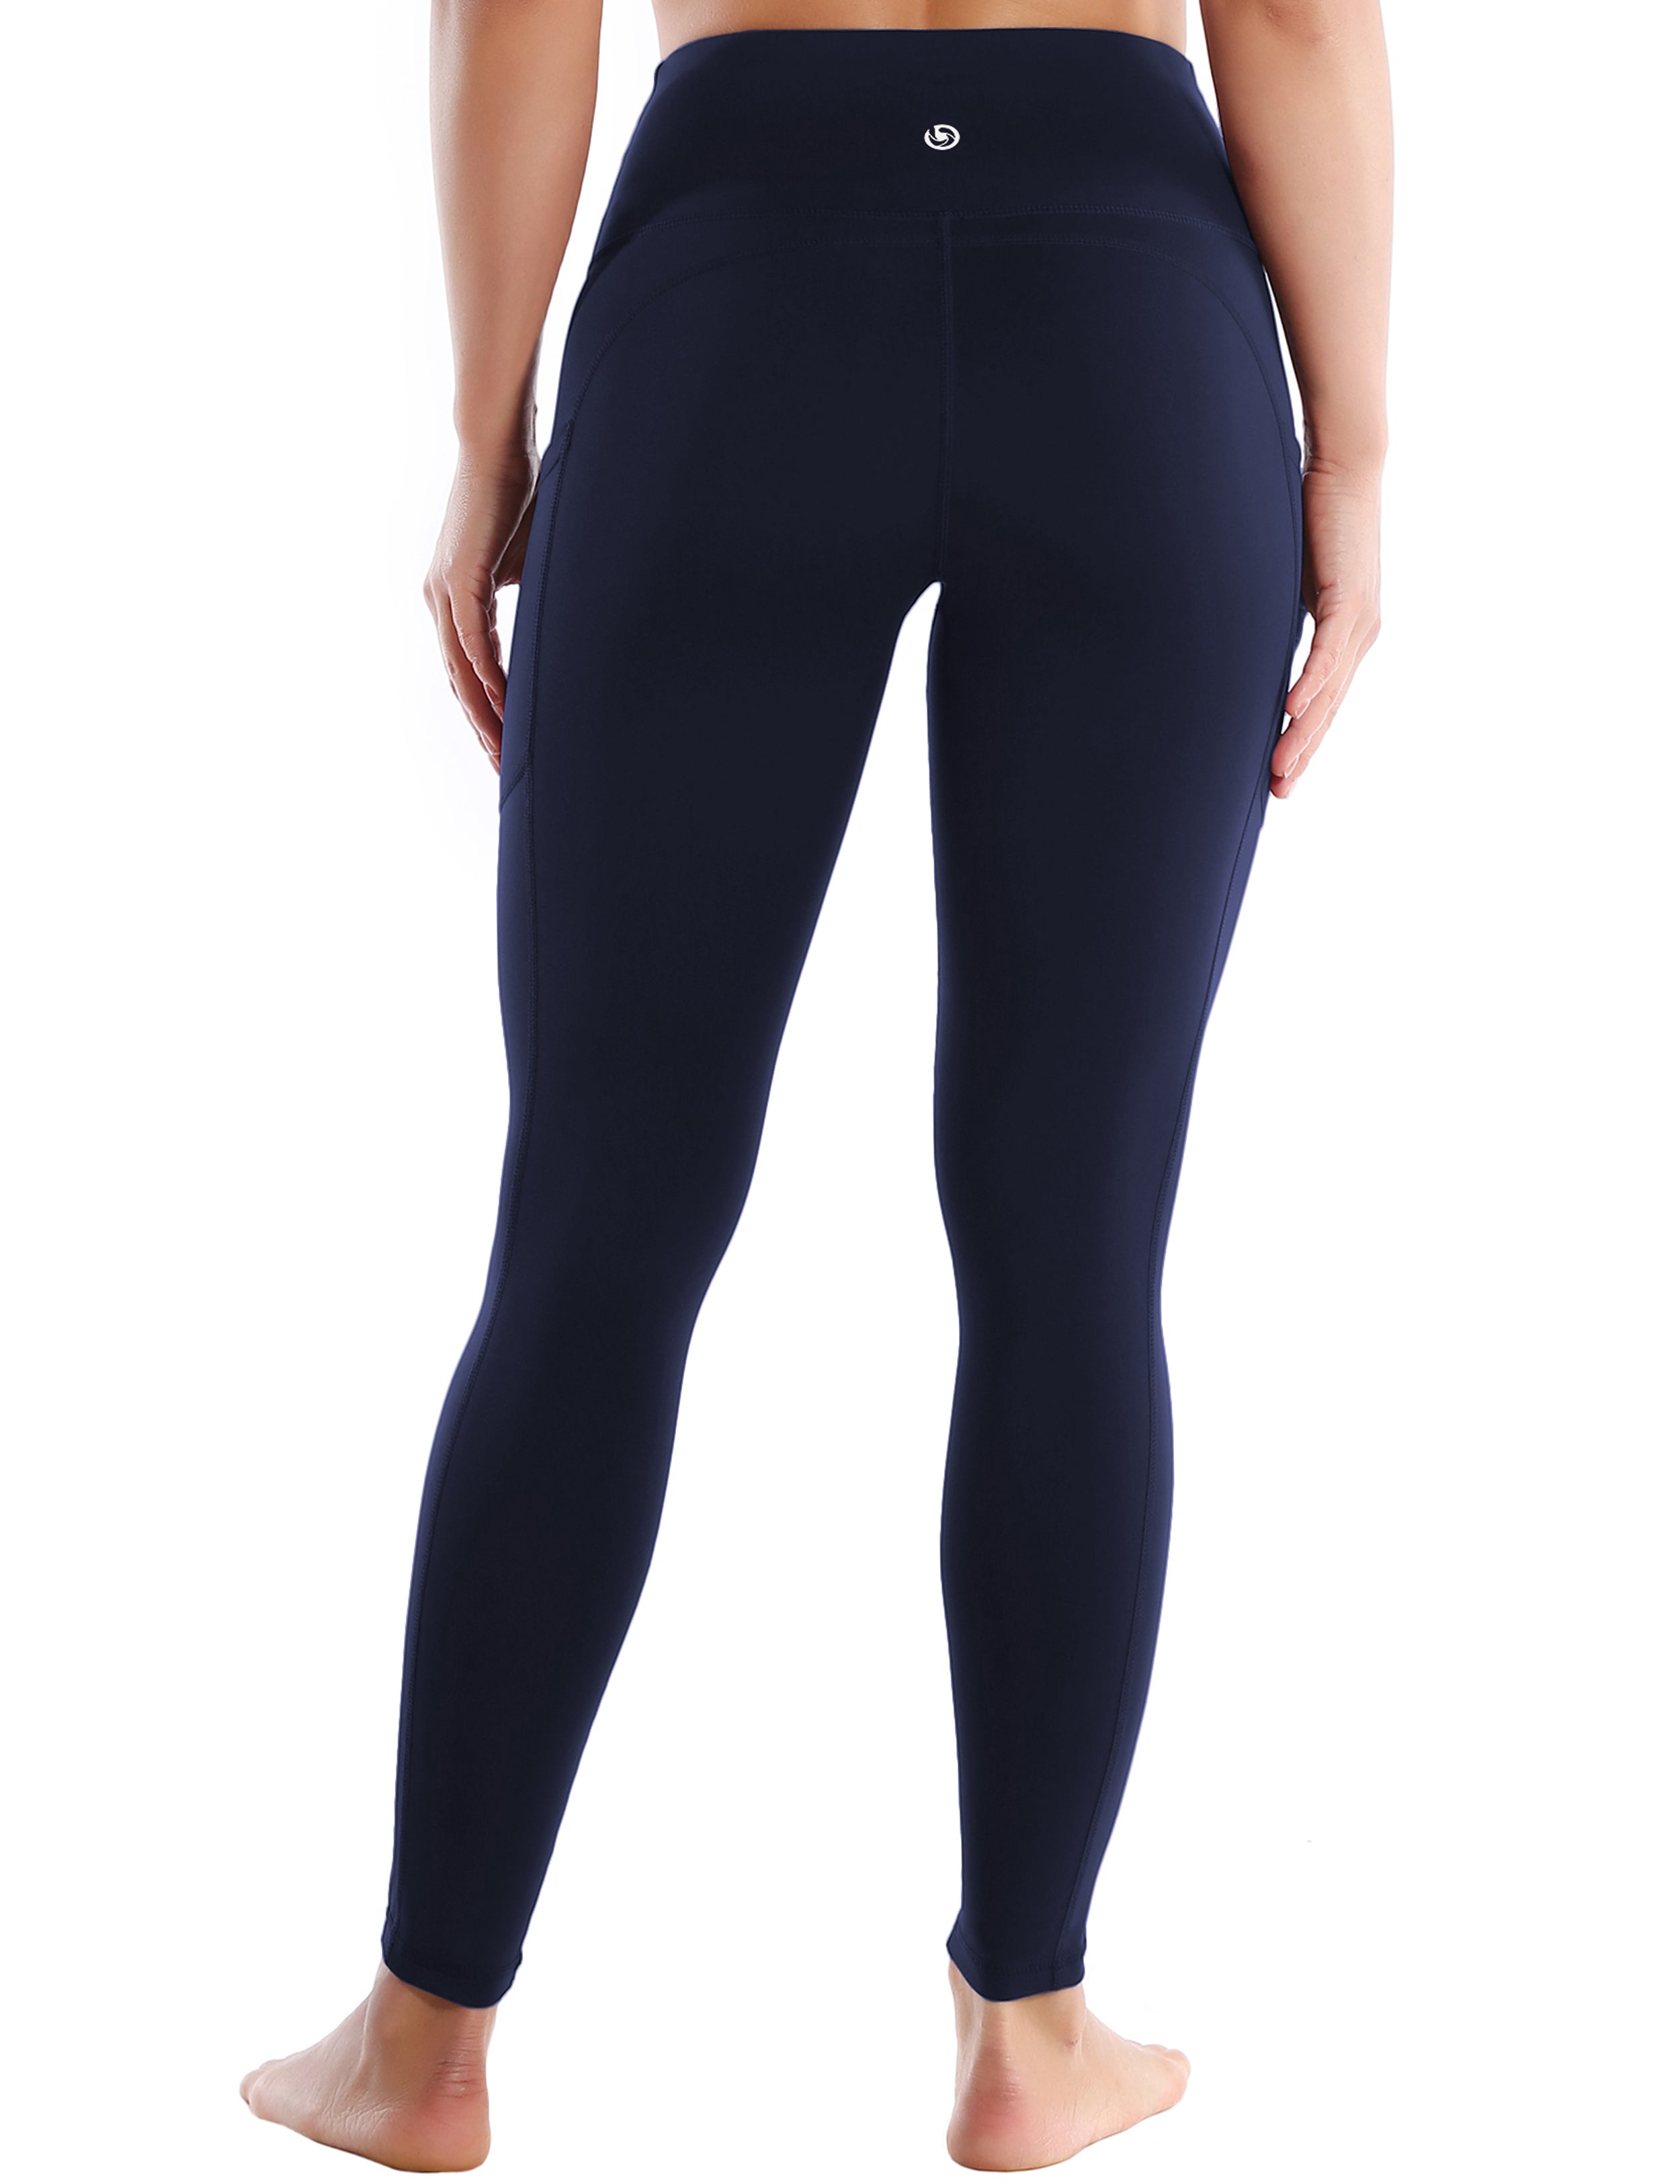 Hip Line Side Pockets Yoga Pants darknavy Sexy Hip Line Side Pockets 75%Nylon/25%Spandex Fabric doesn't attract lint easily 4-way stretch No see-through Moisture-wicking Tummy control Inner pocket Two lengths